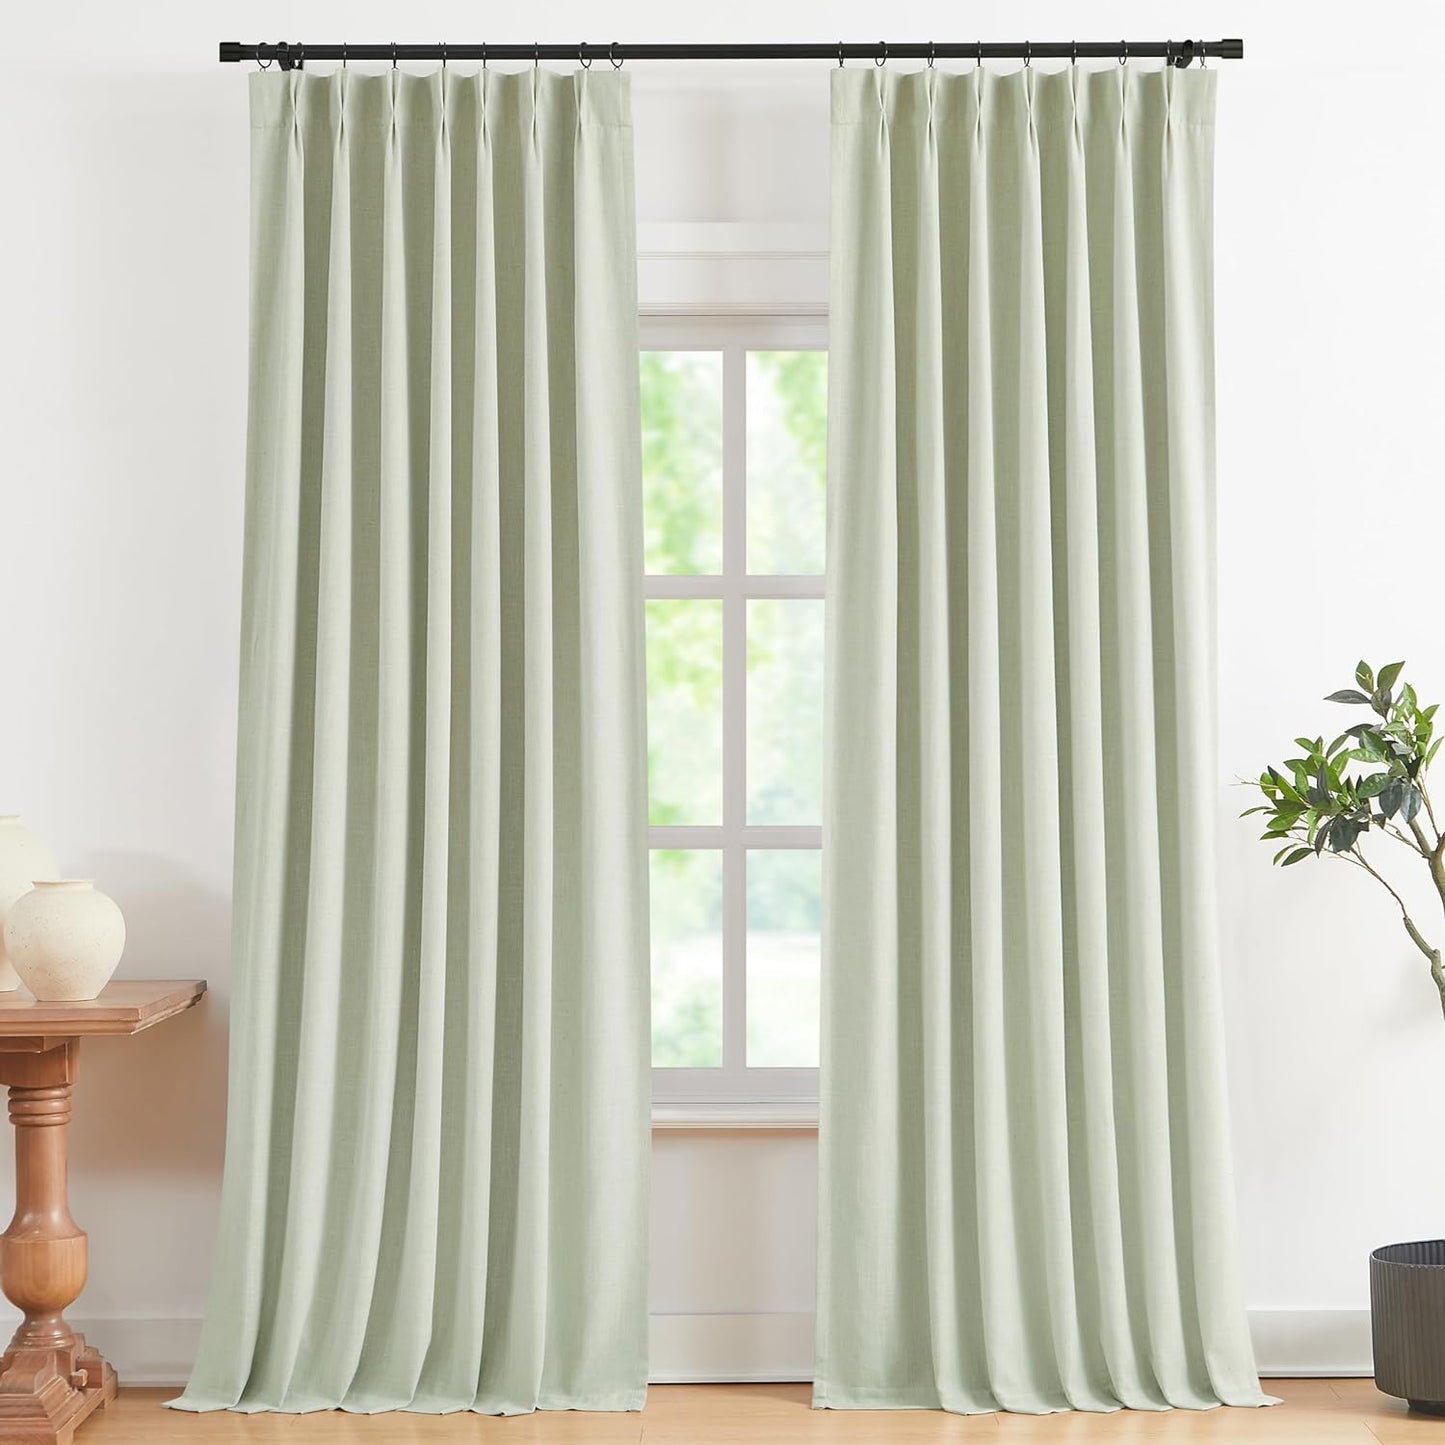 Vision Home White Pinch Pleated Full Blackout Curtains Thermal Insulated Window Curtains 84 Inch for Living Room Bedroom Room Darkening Pinch Pleat Drapes with Hooks Back Tab 2 Panel 40" Wx84 L  Vision Home Soft Green 40"X108"X2 